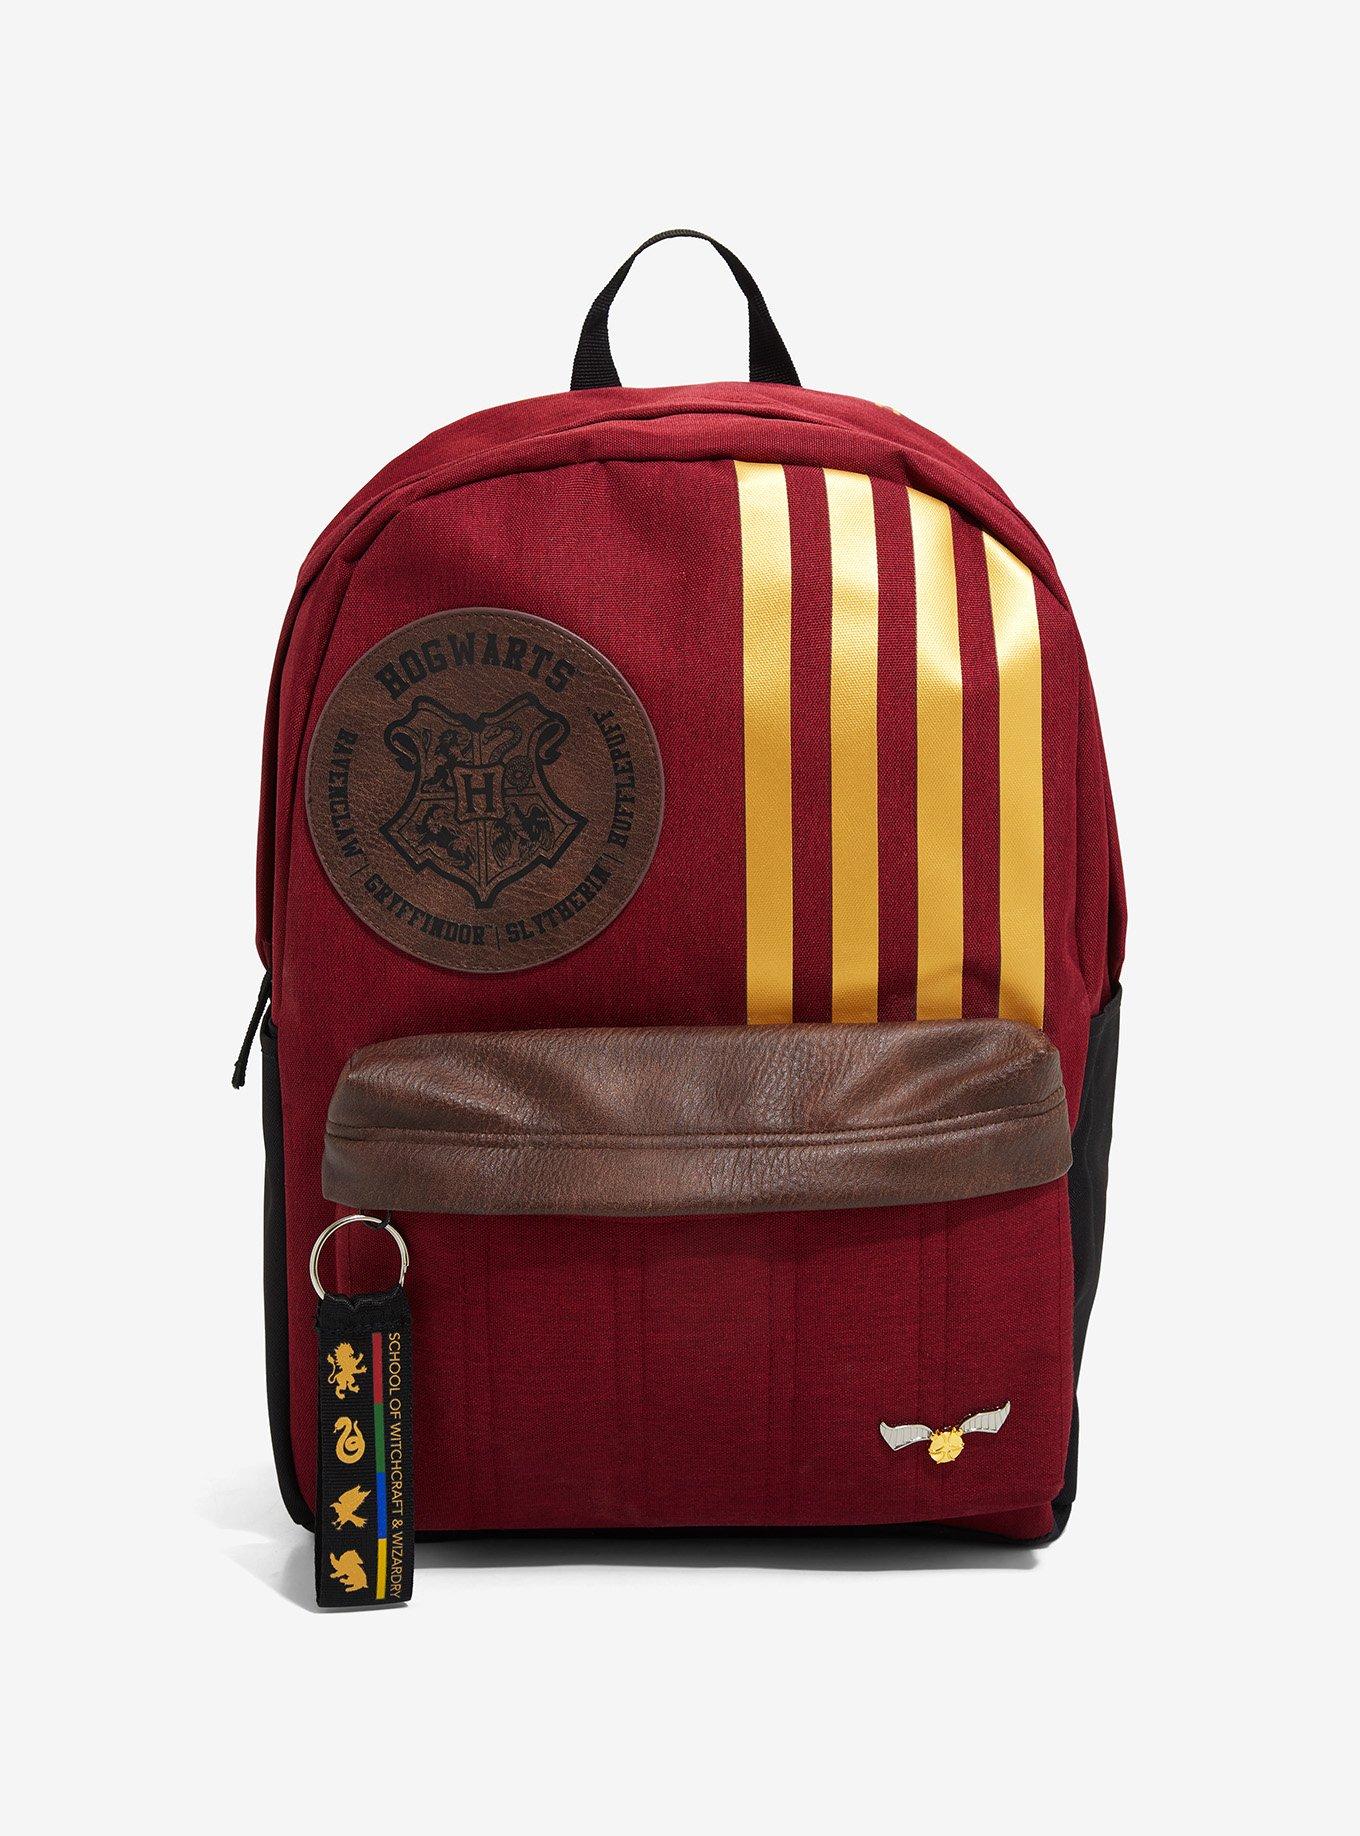 Harry Potter Backpack Bag Hogwarts School of Witchcraft and Wizardry Boy &  Girls